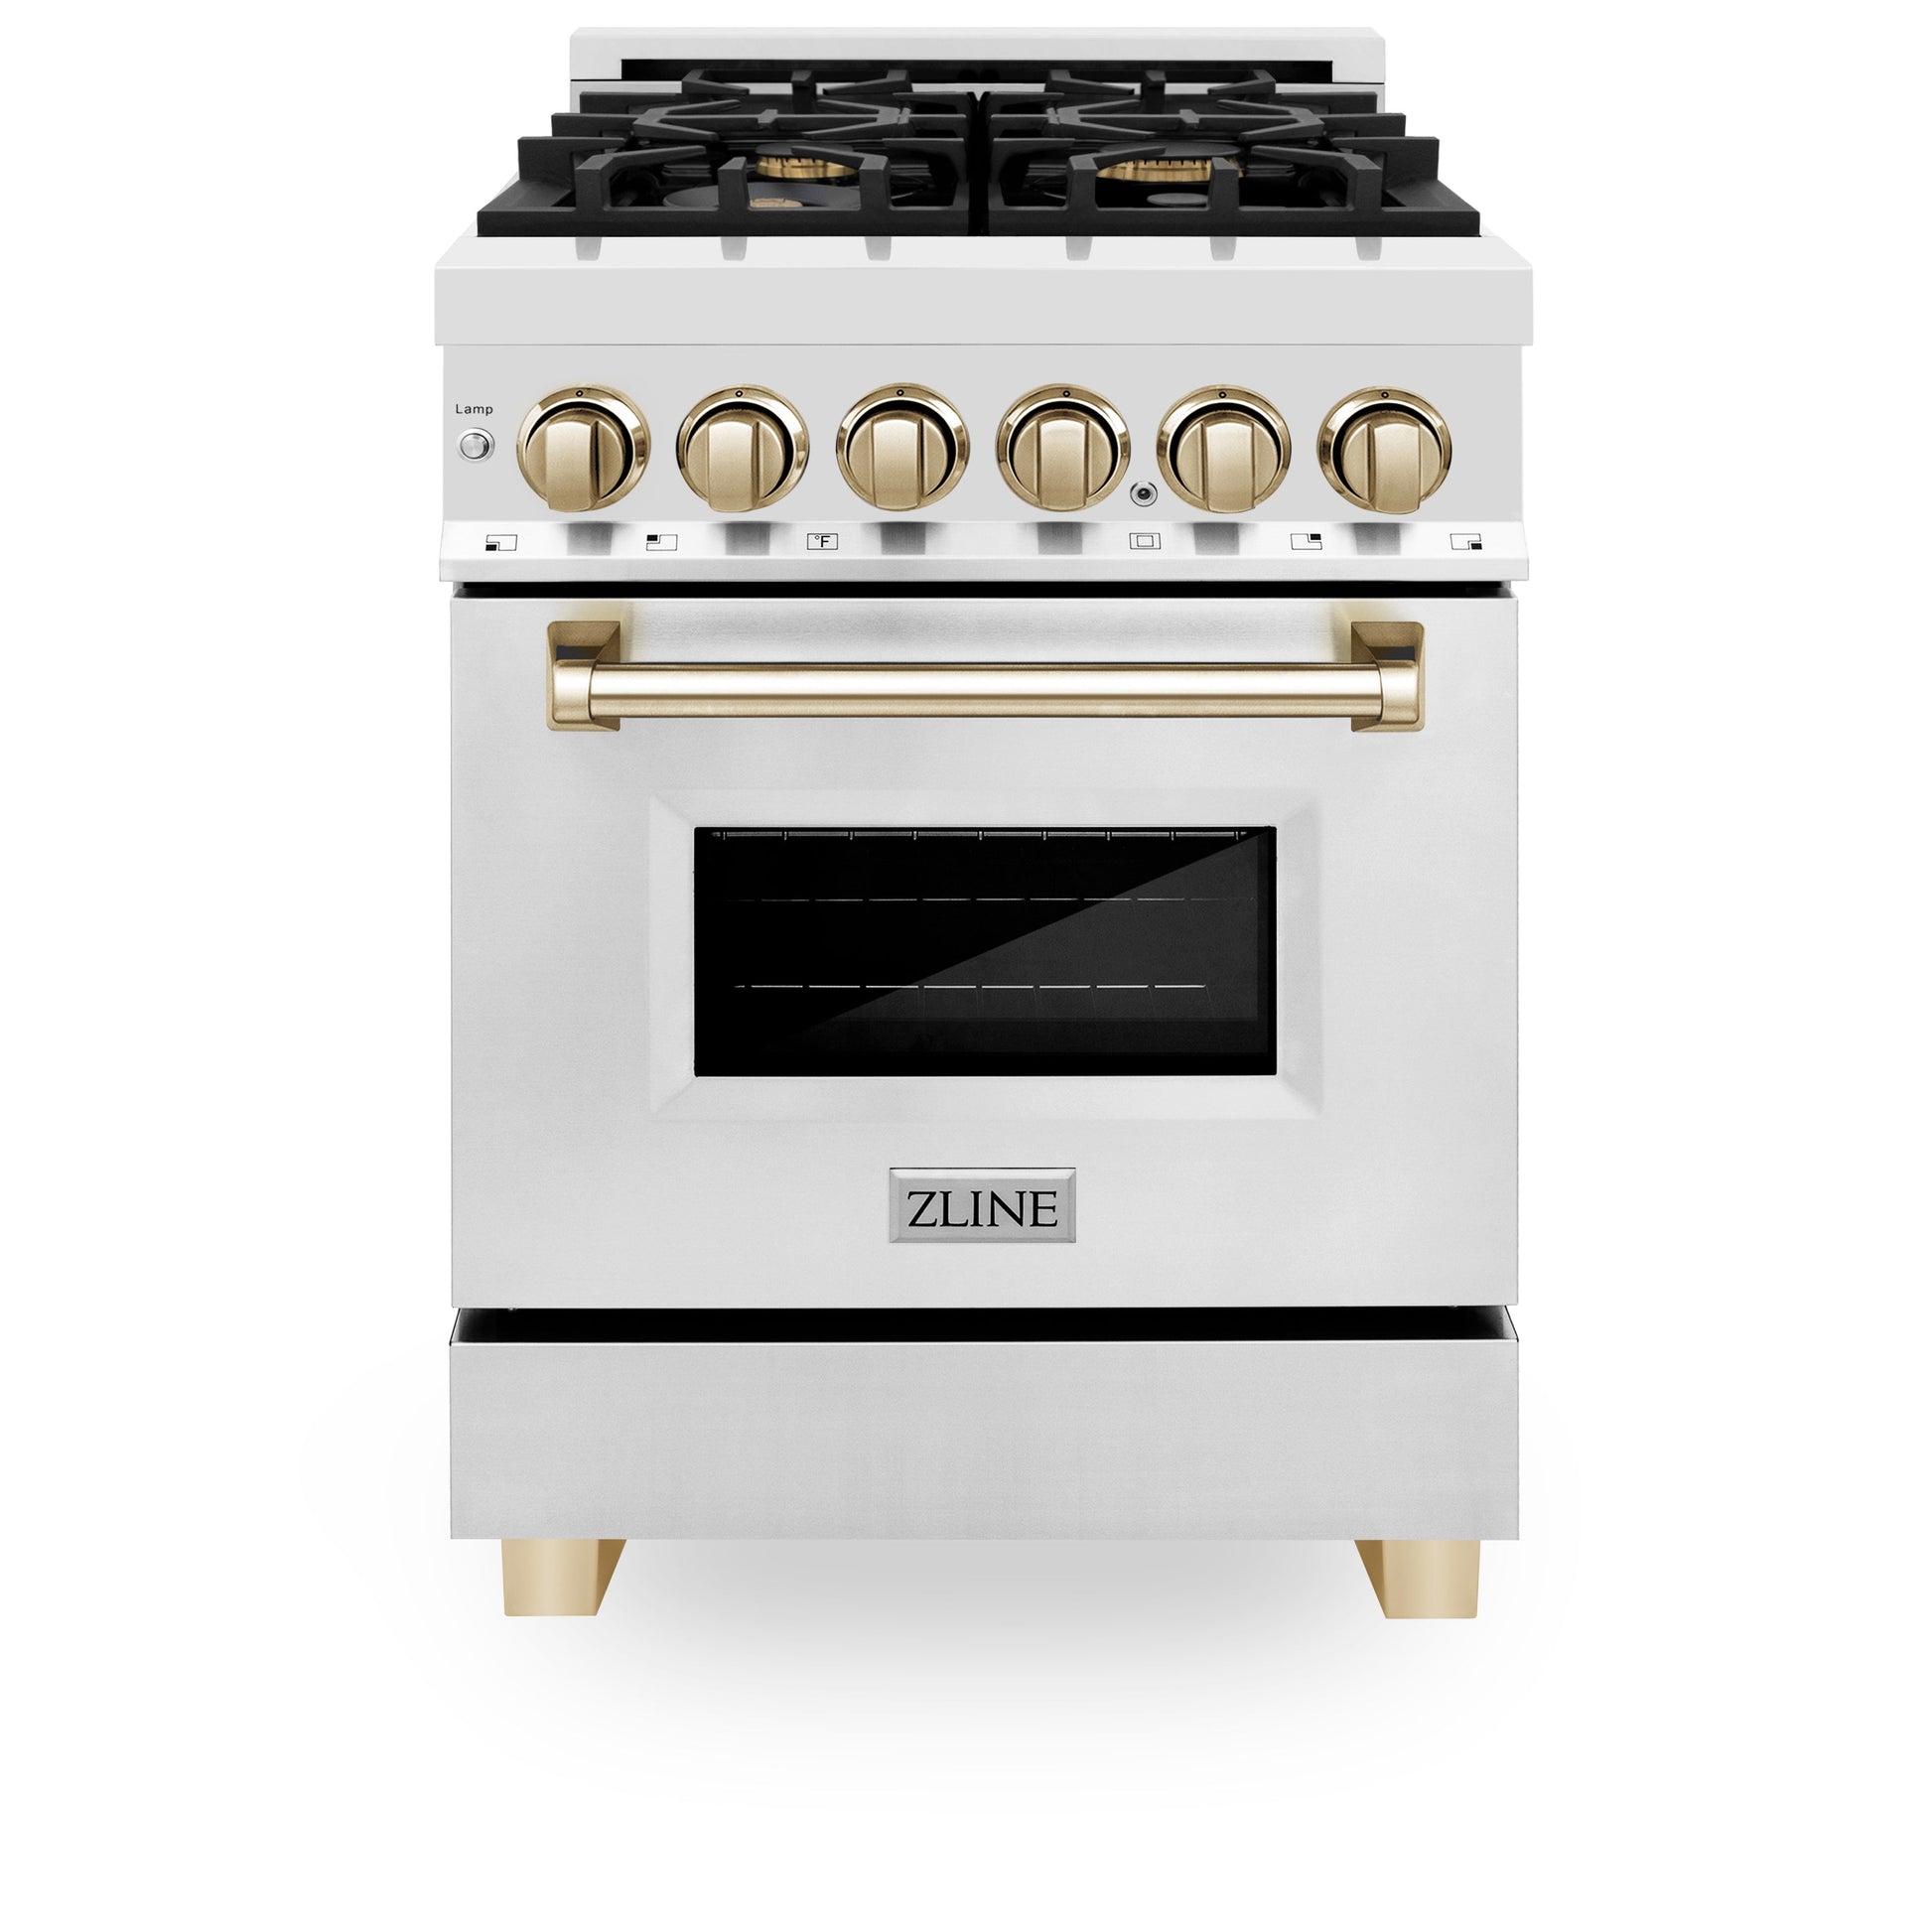 ZLINE Autograph Edition 24" Dual Fuel Range with Gas Stove and Electric Oven - Stainless Steel with Accents